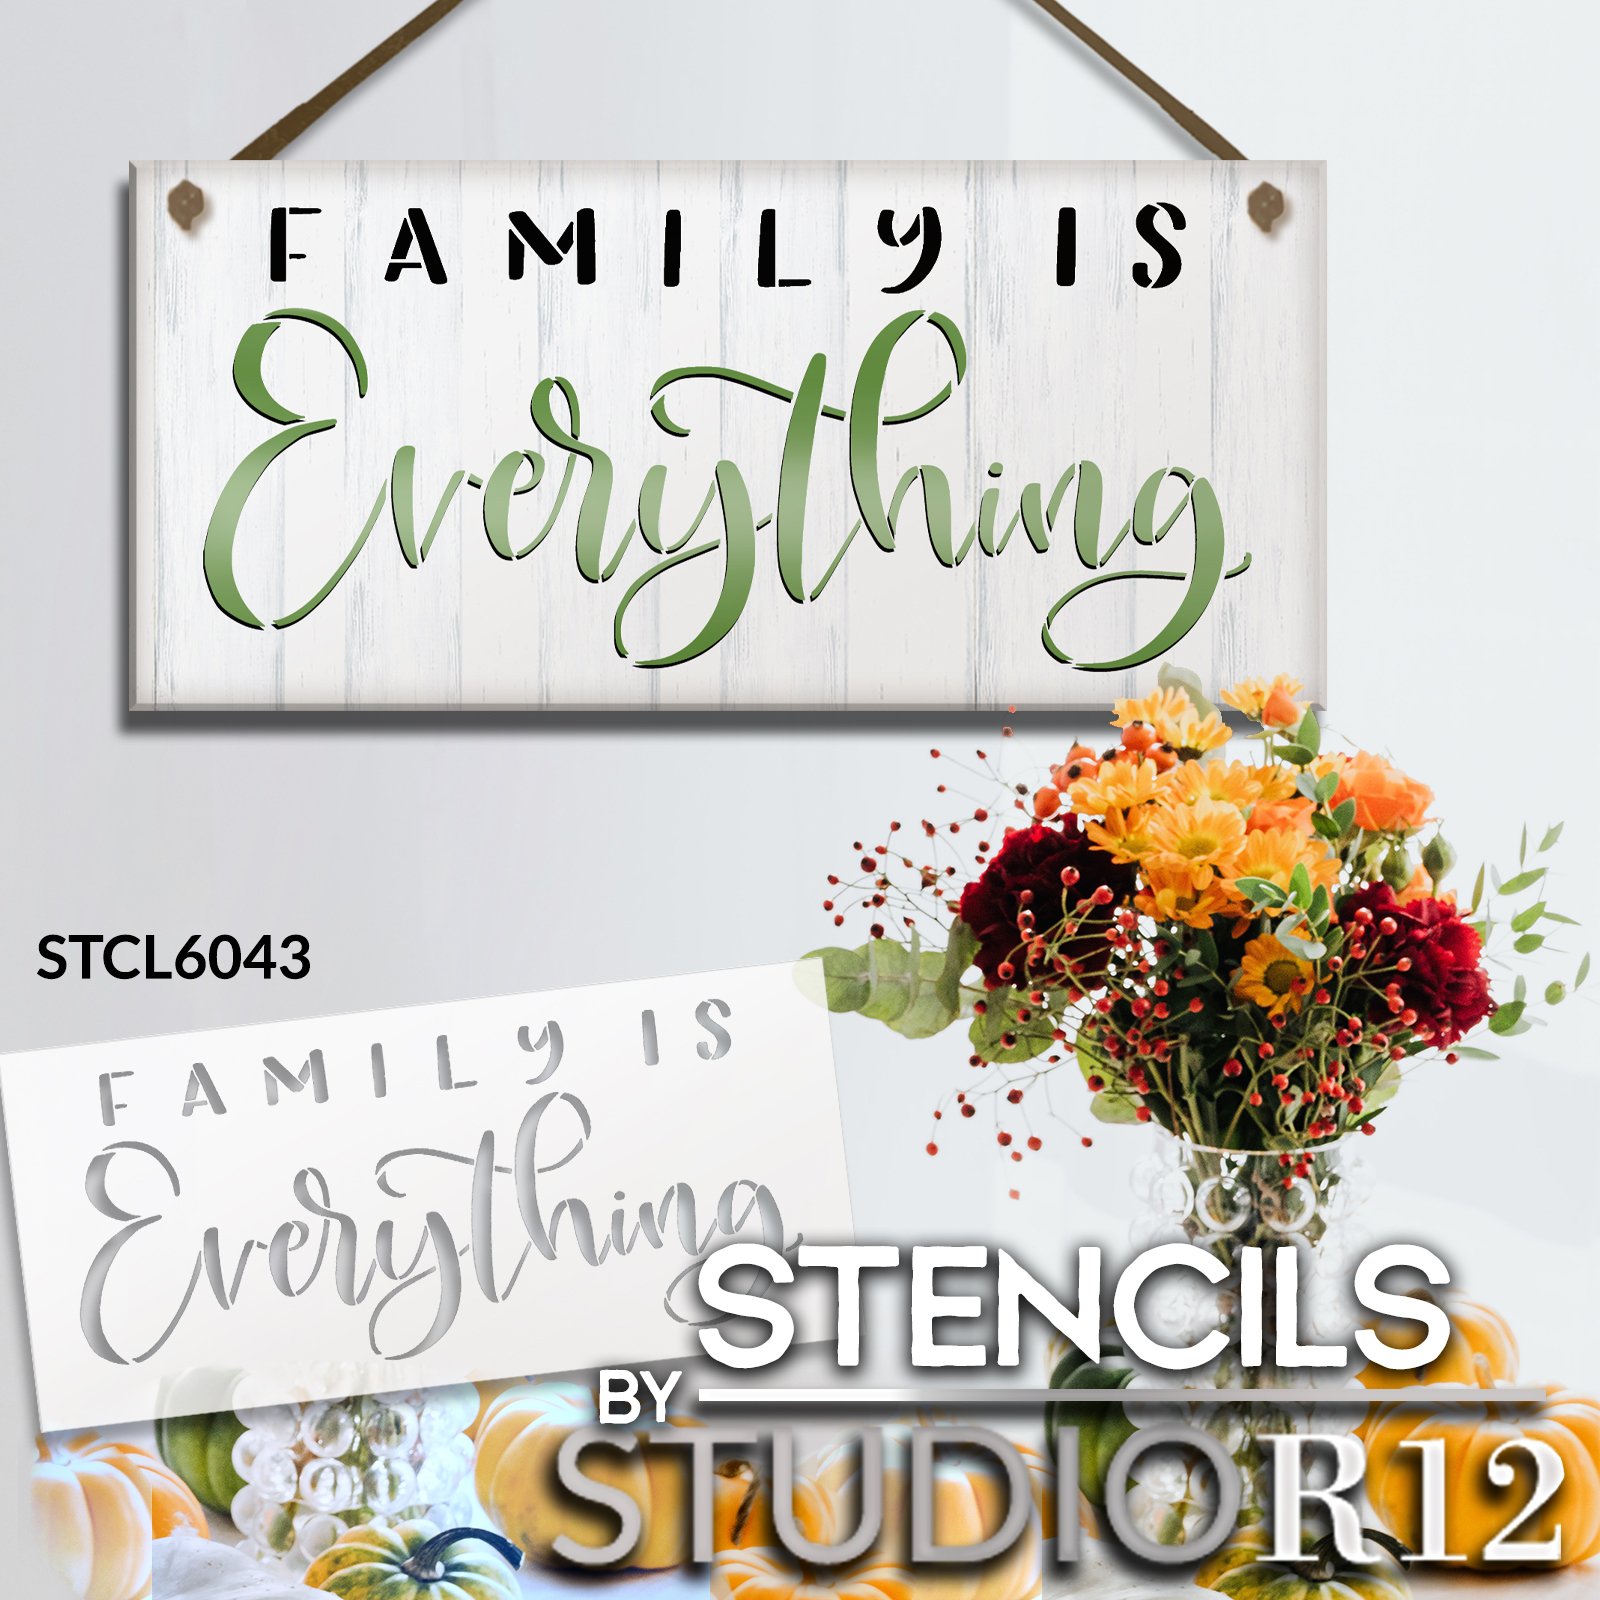 Family is Everything Stencil by StudioR12 | Craft DIY Farmhouse Home Decor | Paint Wood Sign | Reusable Mylar Template | Select Size